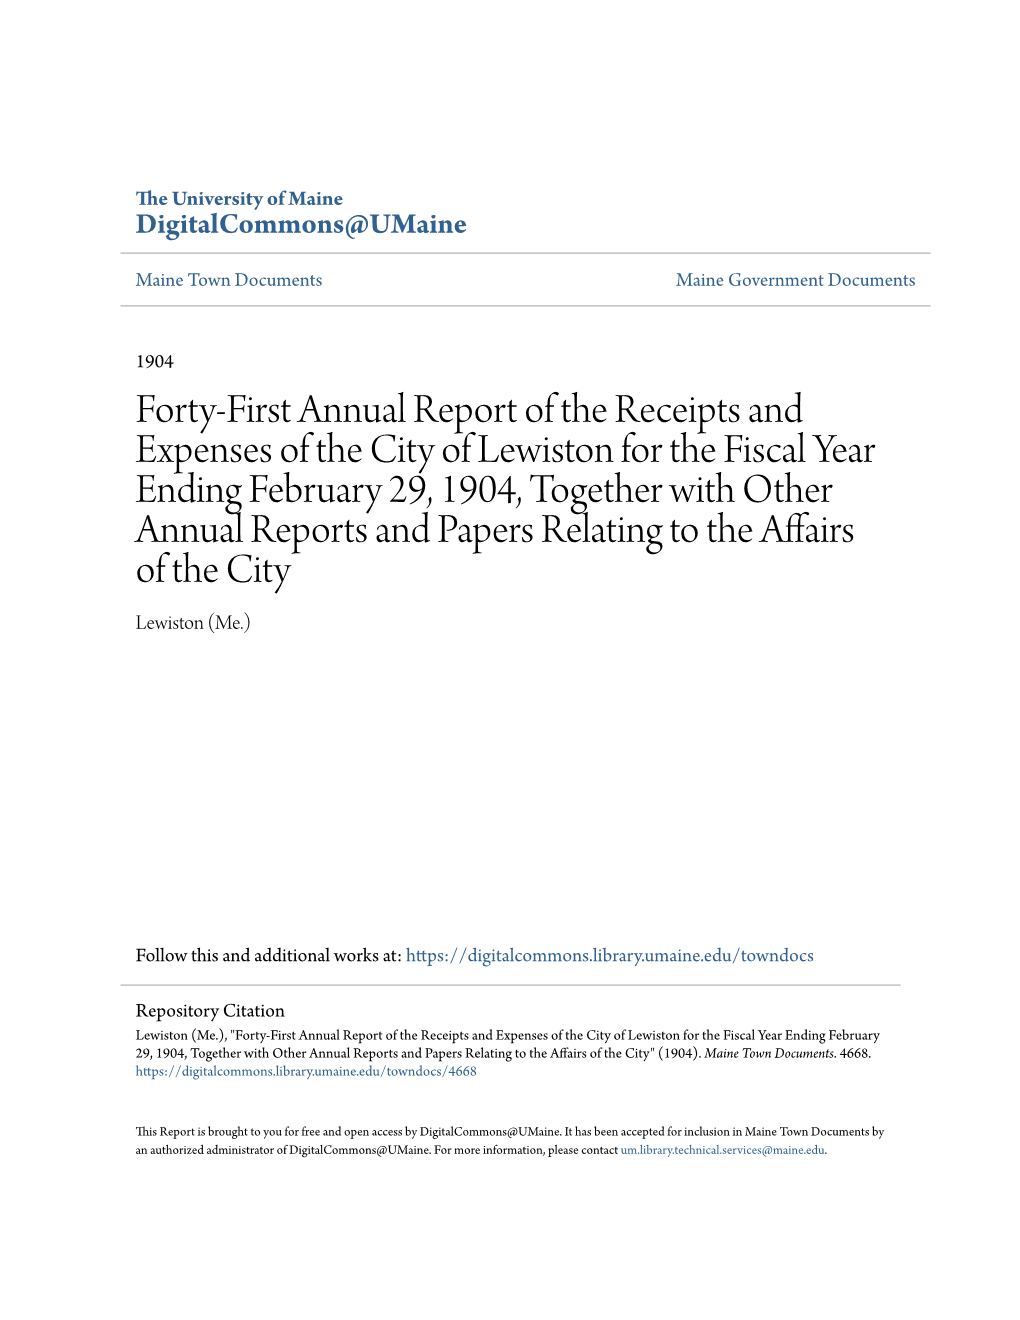 Forty-First Annual Report of the Receipts and Expenses of the City of Lewiston for the Fiscal Year Ending February 29, 1904